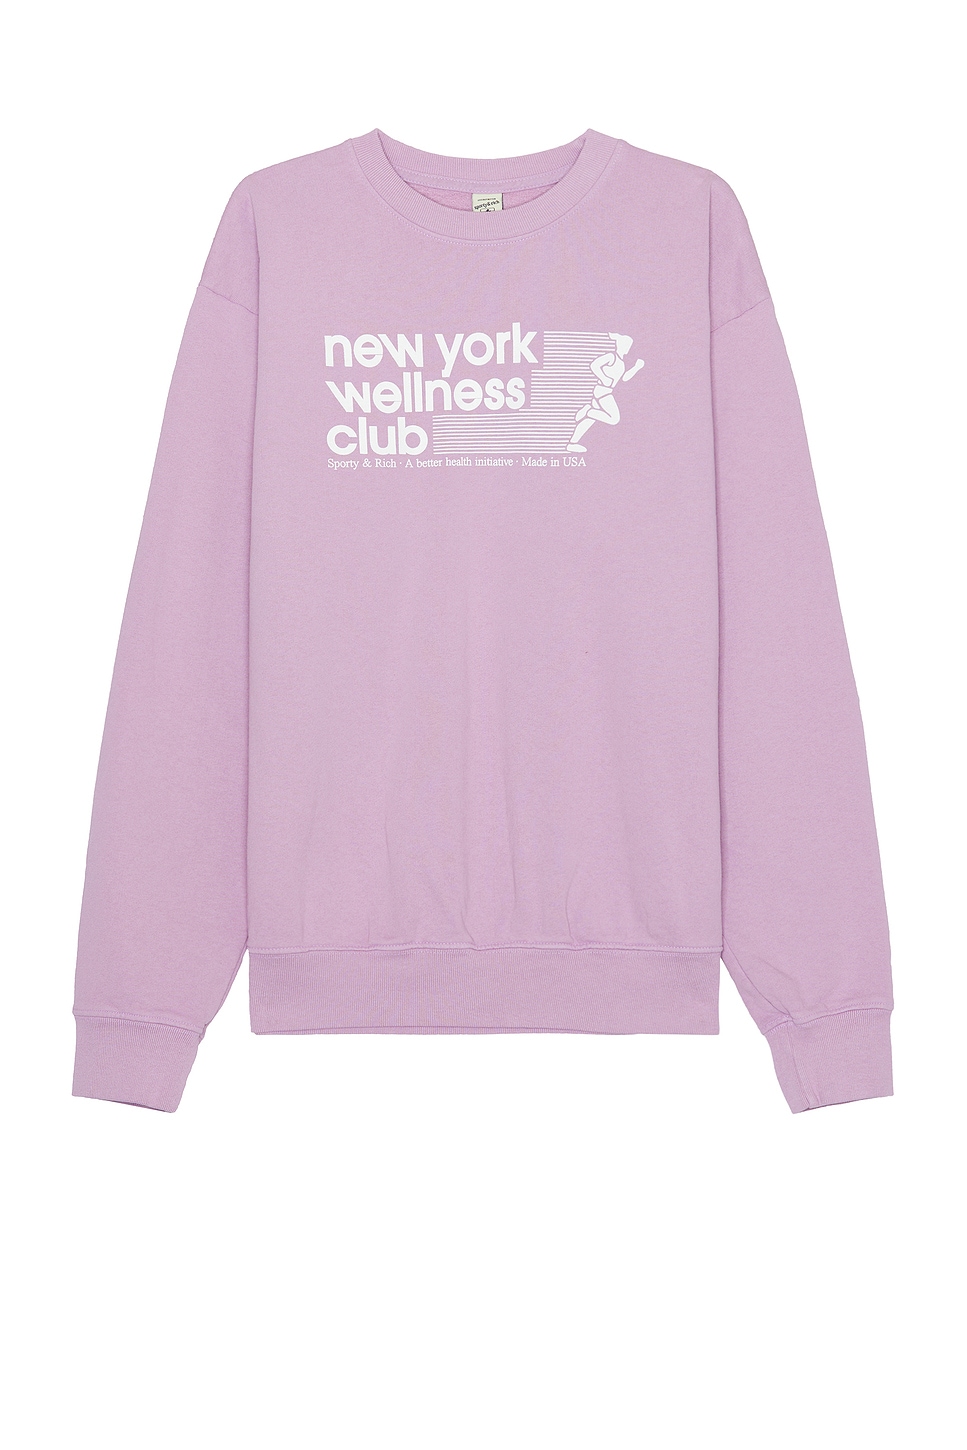 Image 1 of Sporty & Rich Usa Wellness Club Crewneck in Soft Lavender